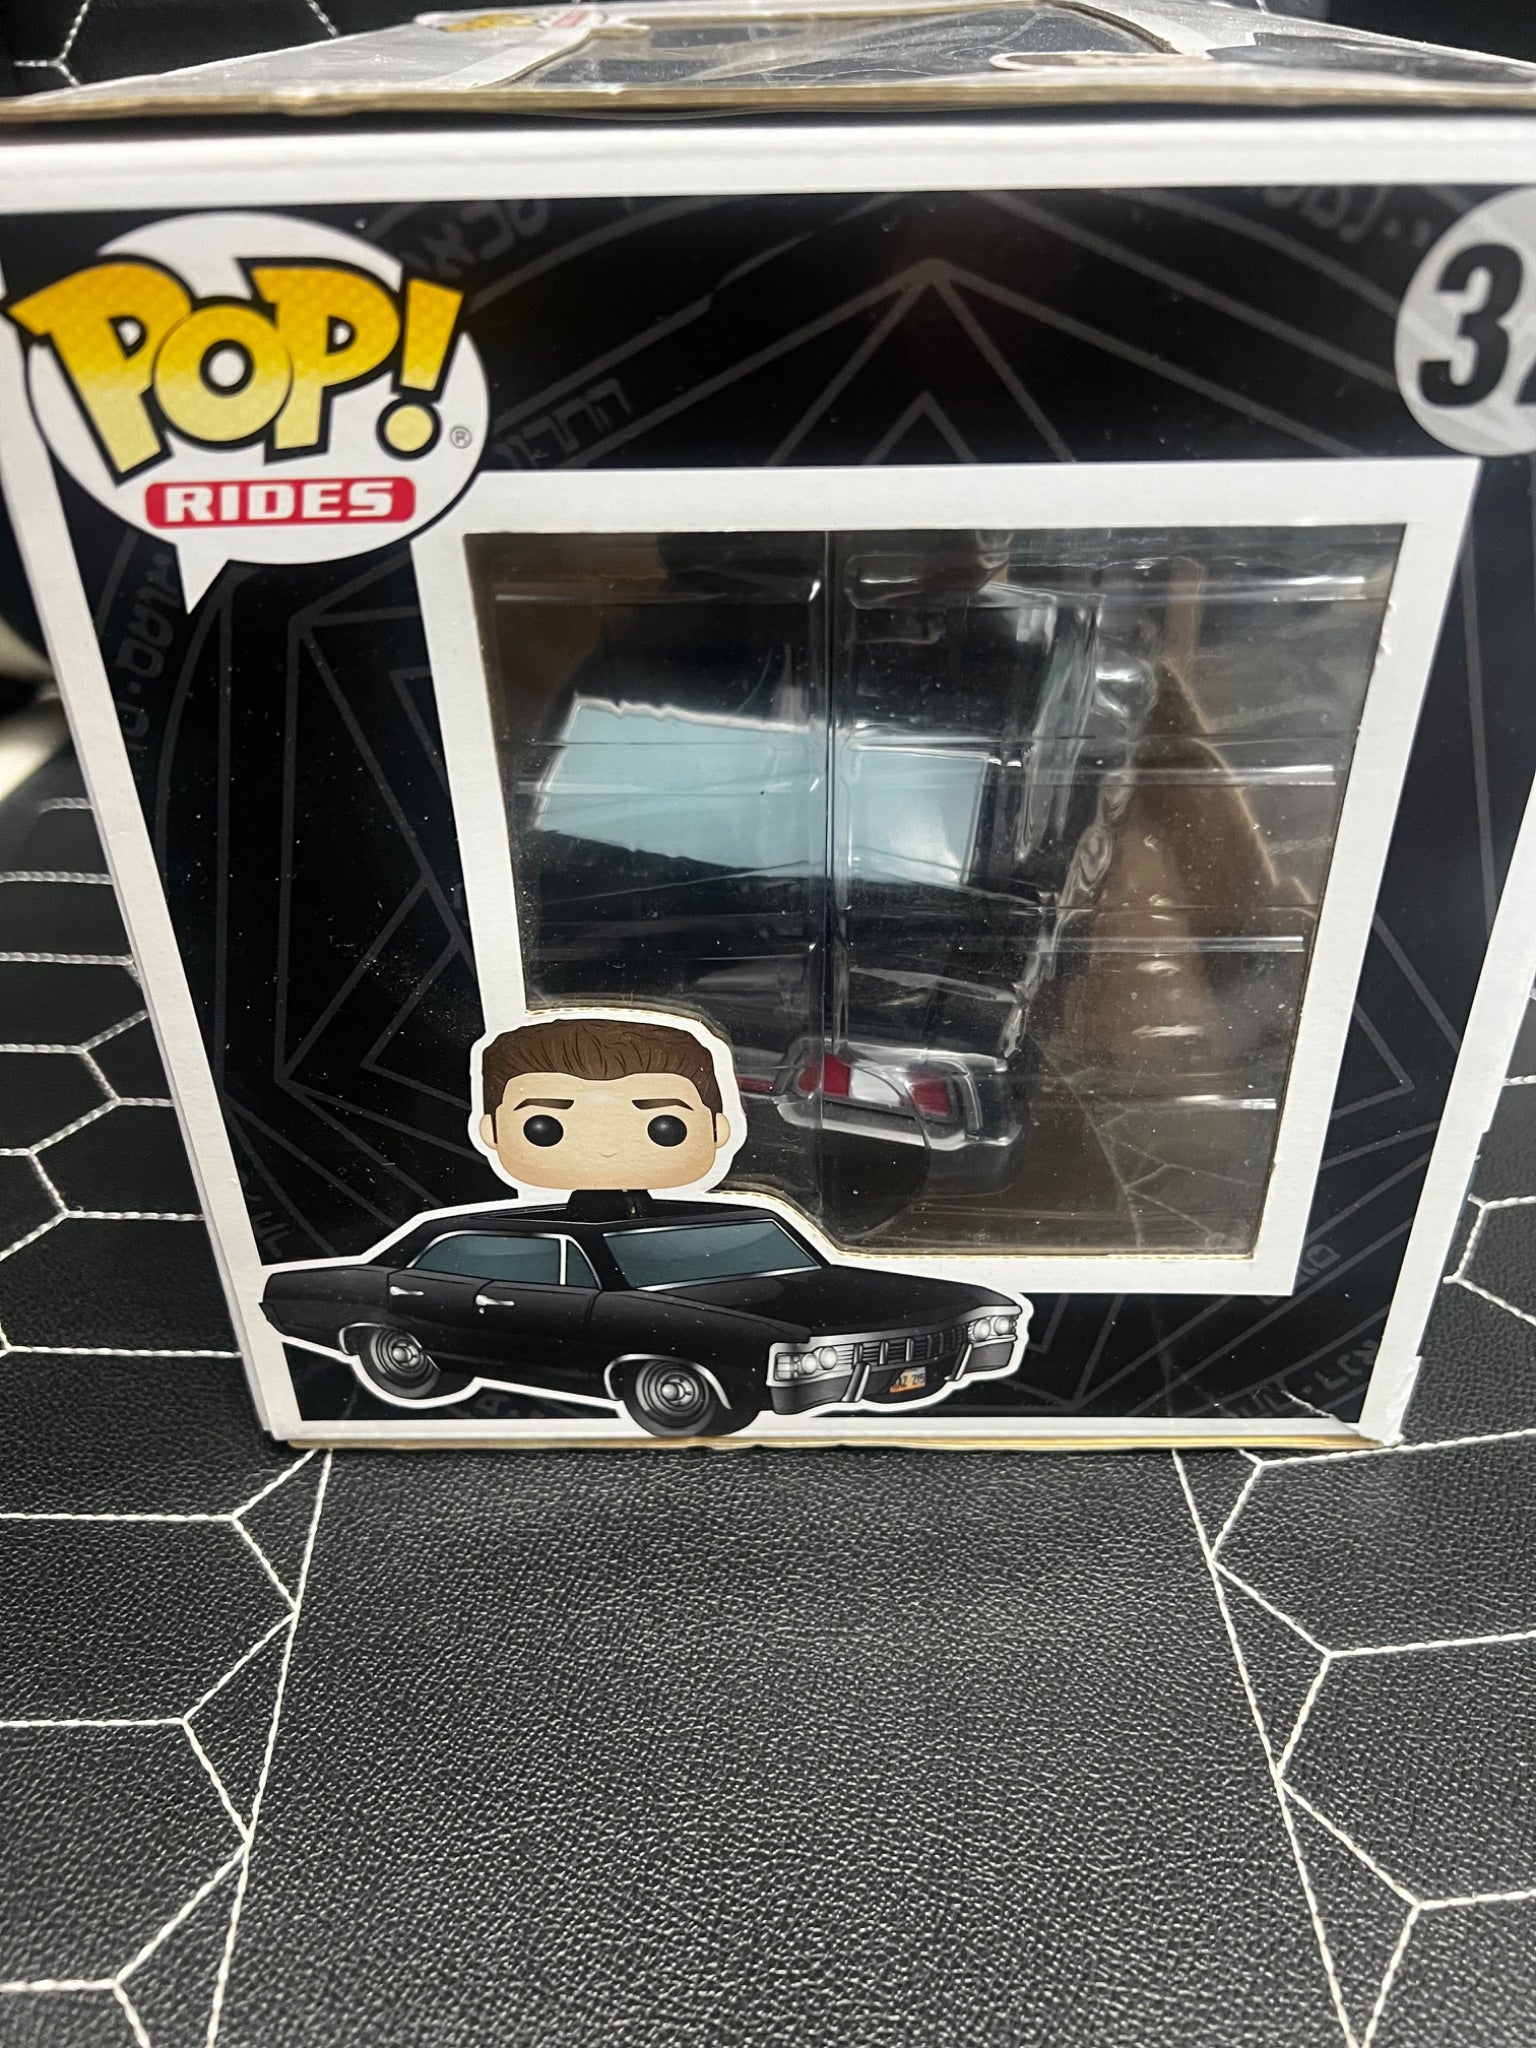 #32 - Dean Winchester with Baby (2017 Summer Convention Exclusive) - Supernatural - Funko Pop Rides - 4